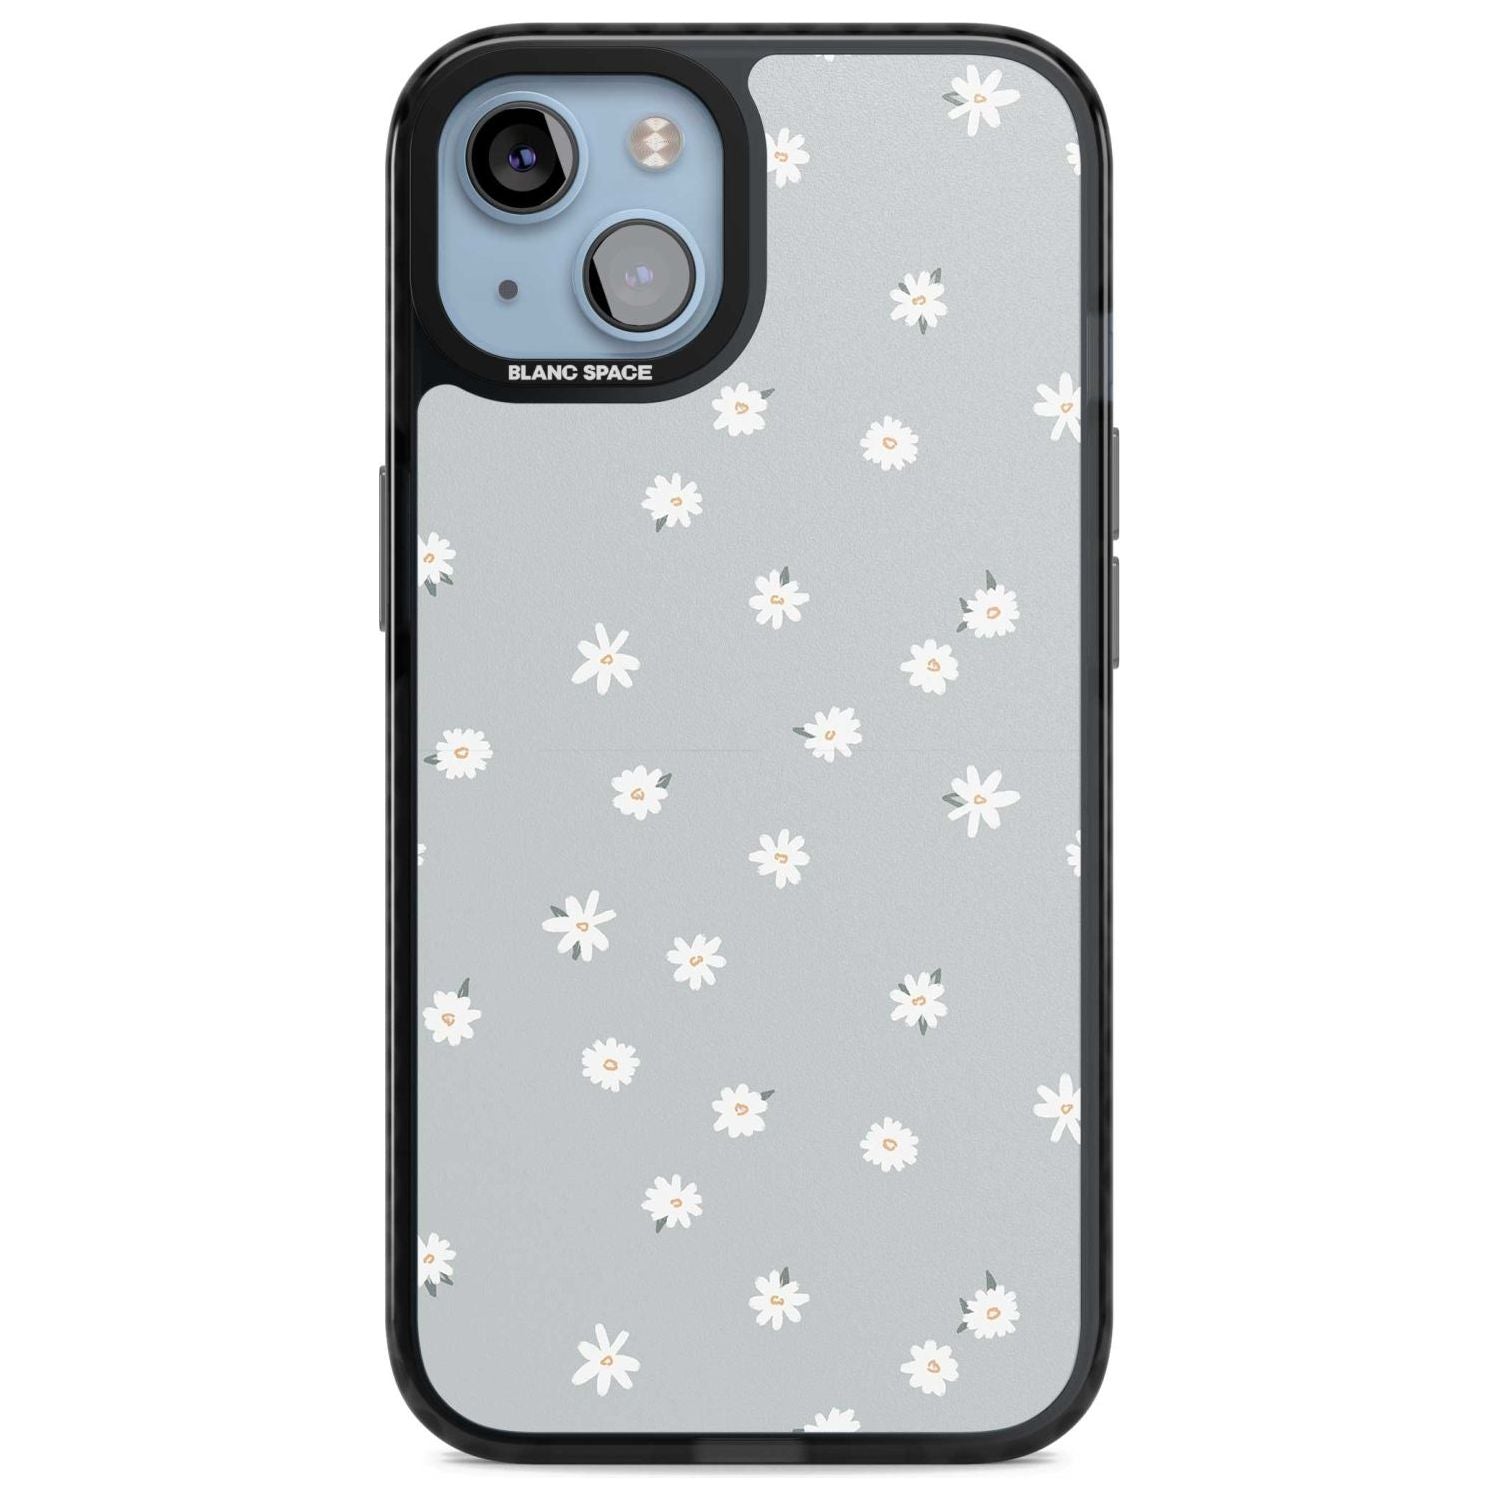 Painted Daisy Blue-Grey Cute Phone Case iPhone 15 Plus / Magsafe Black Impact Case,iPhone 15 / Magsafe Black Impact Case,iPhone 14 Plus / Magsafe Black Impact Case,iPhone 14 / Magsafe Black Impact Case,iPhone 13 / Magsafe Black Impact Case Blanc Space